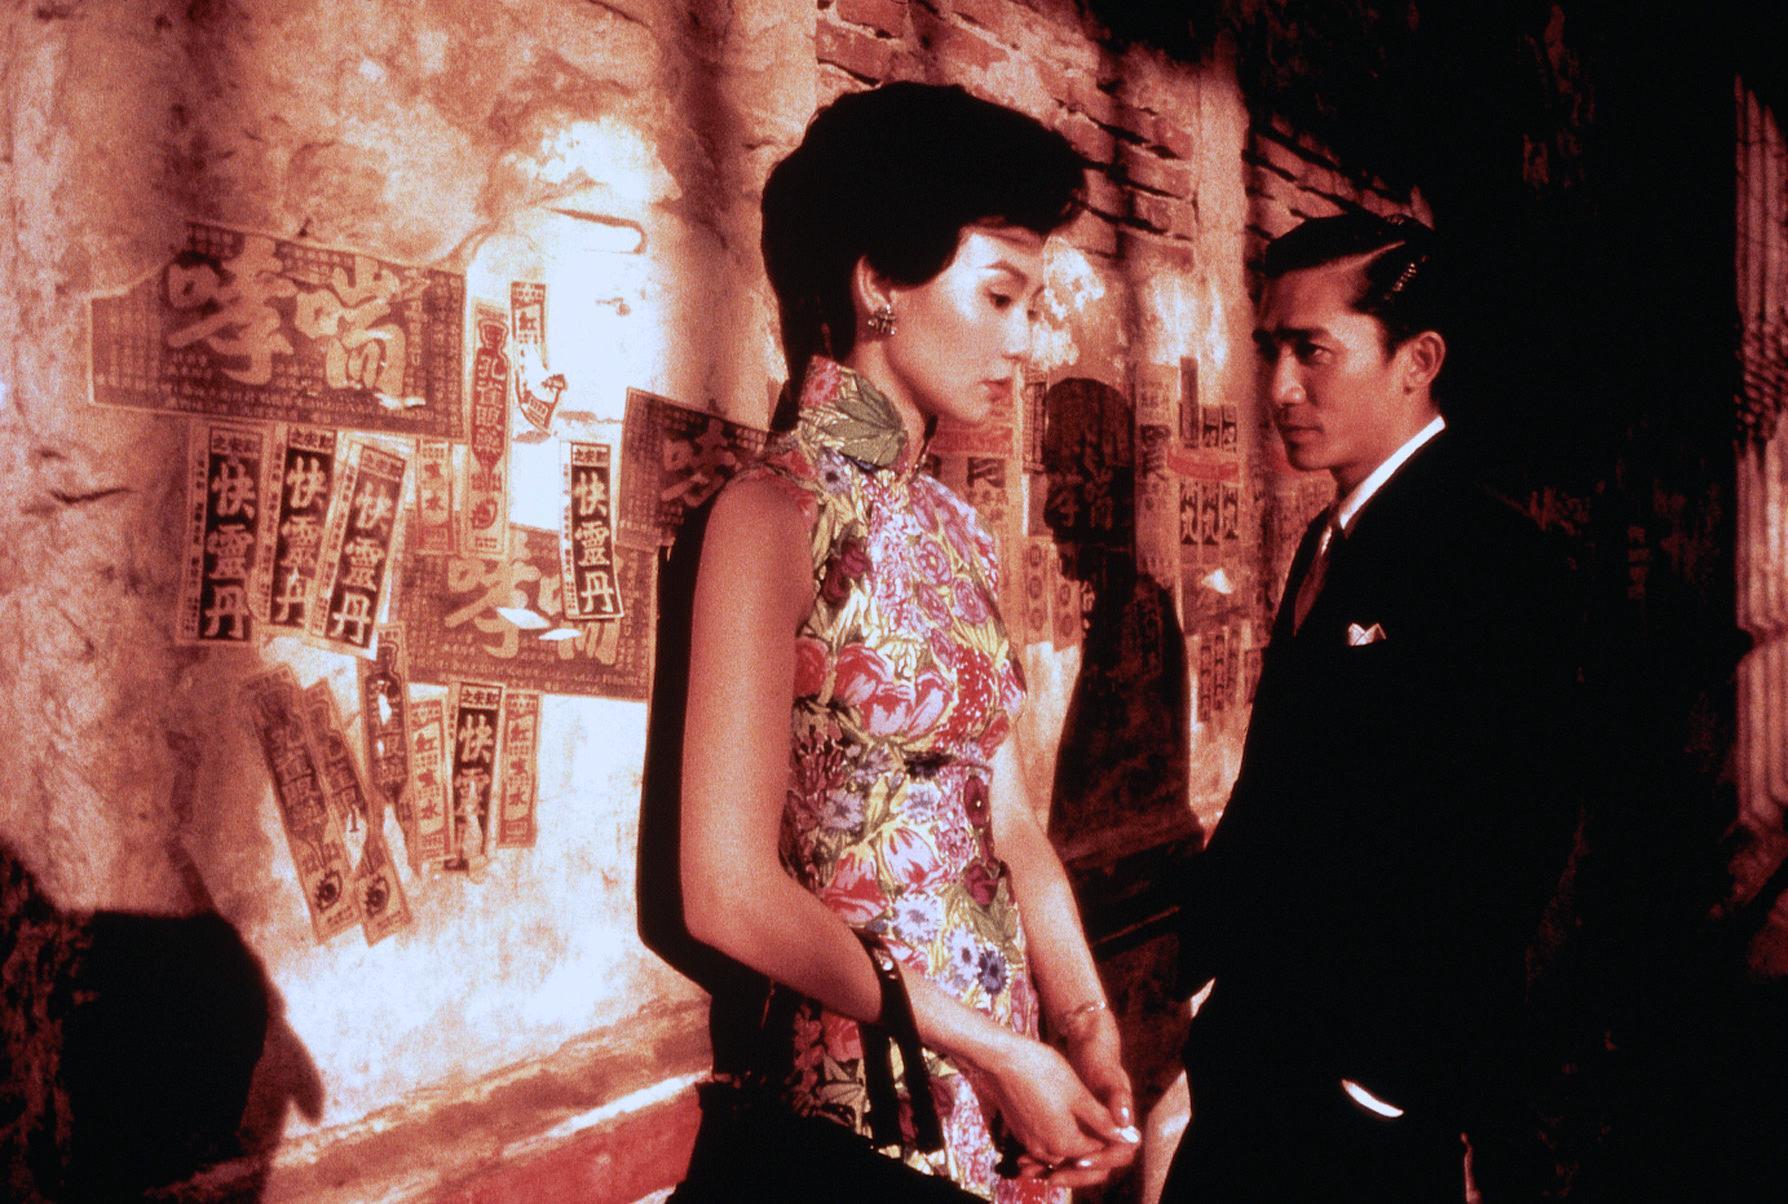 Maggie Cheung and Tony Leung in Wong Kar-wai’s ‘In the Mood for Love’